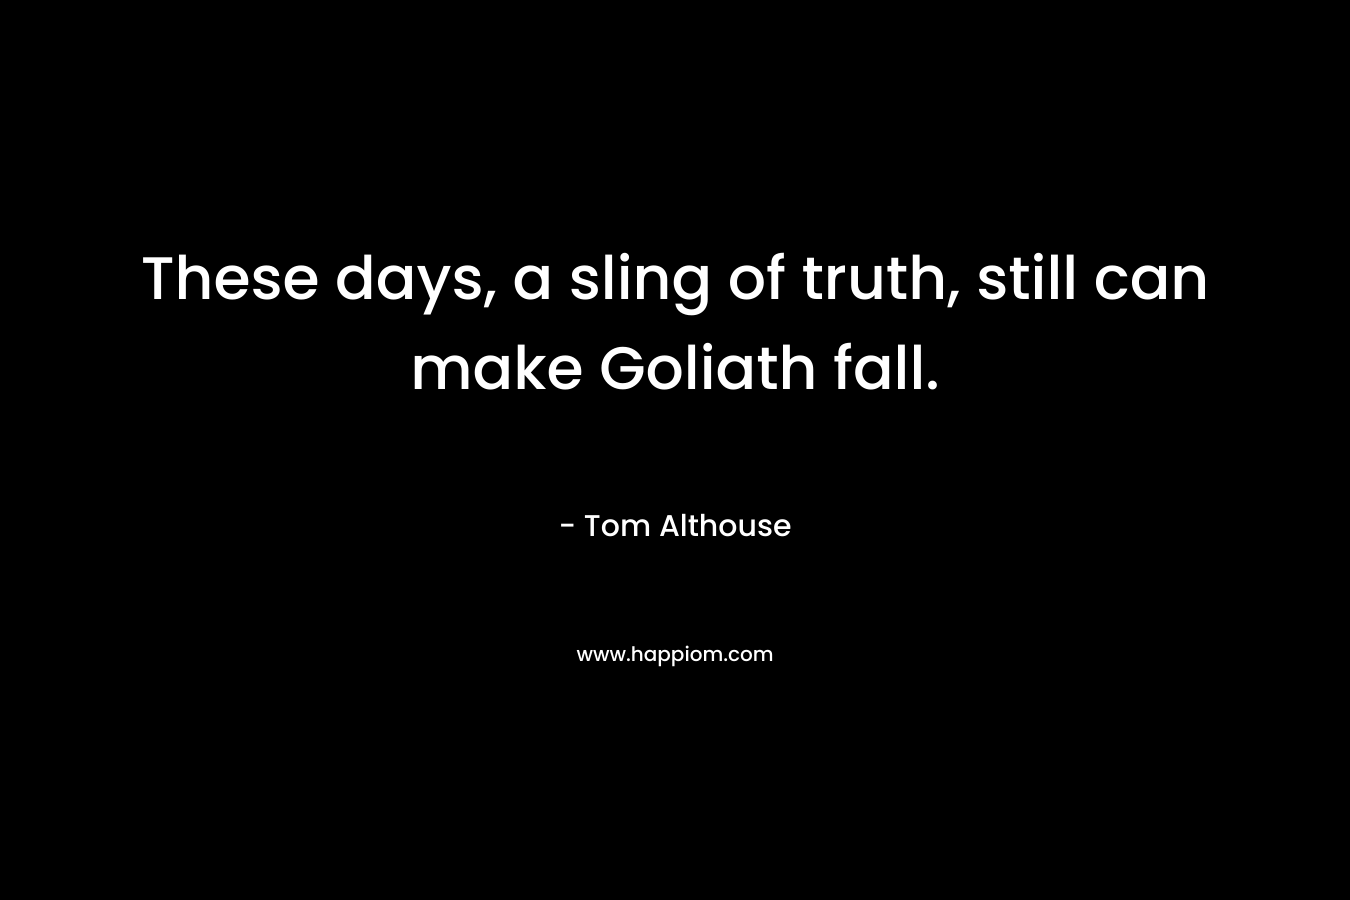 These days, a sling of truth, still can make Goliath fall. – Tom Althouse